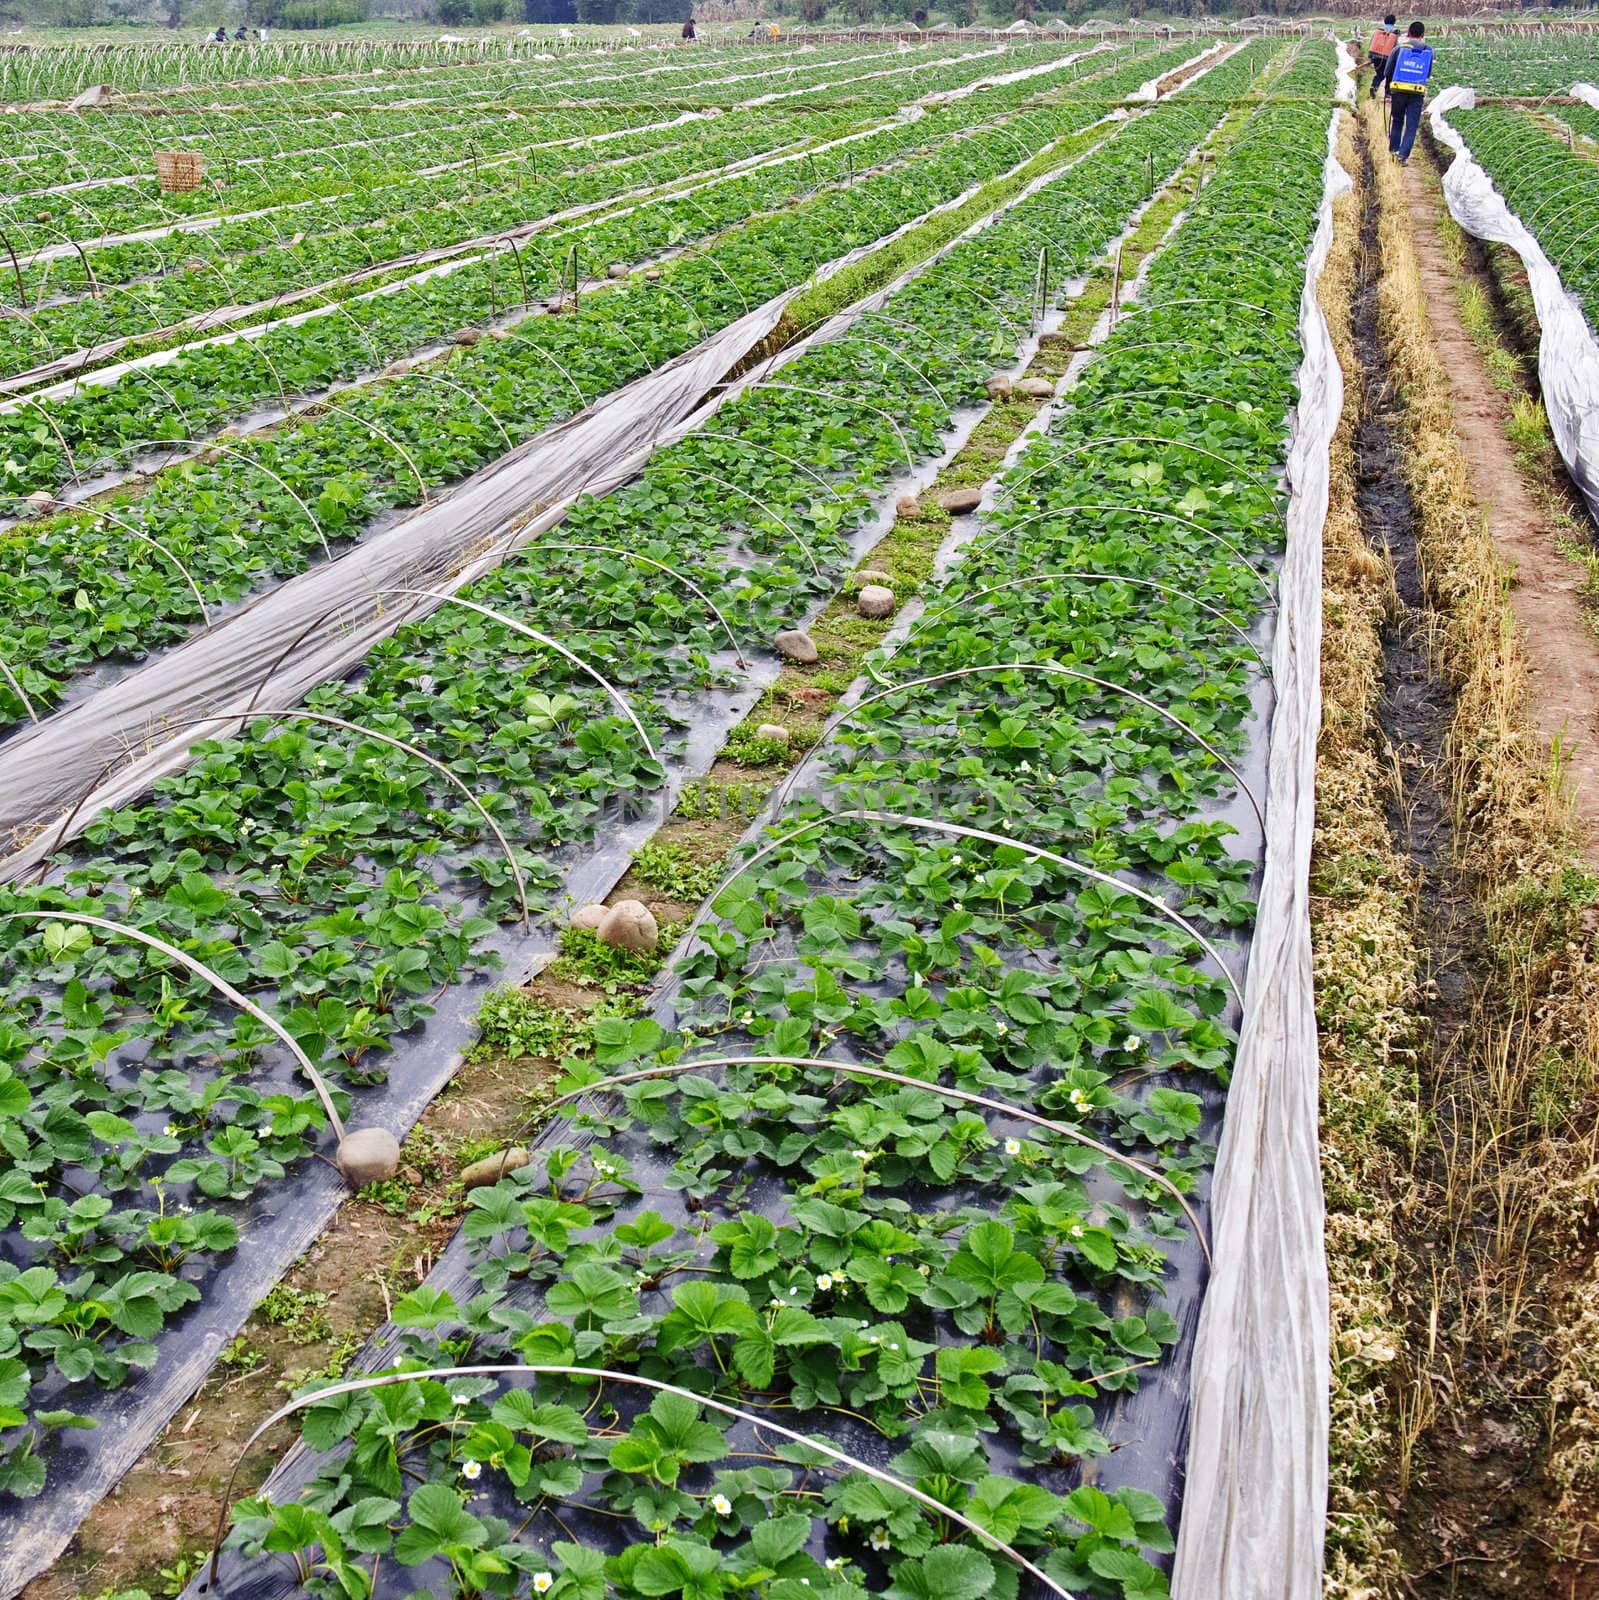 Rows of young strawberry field